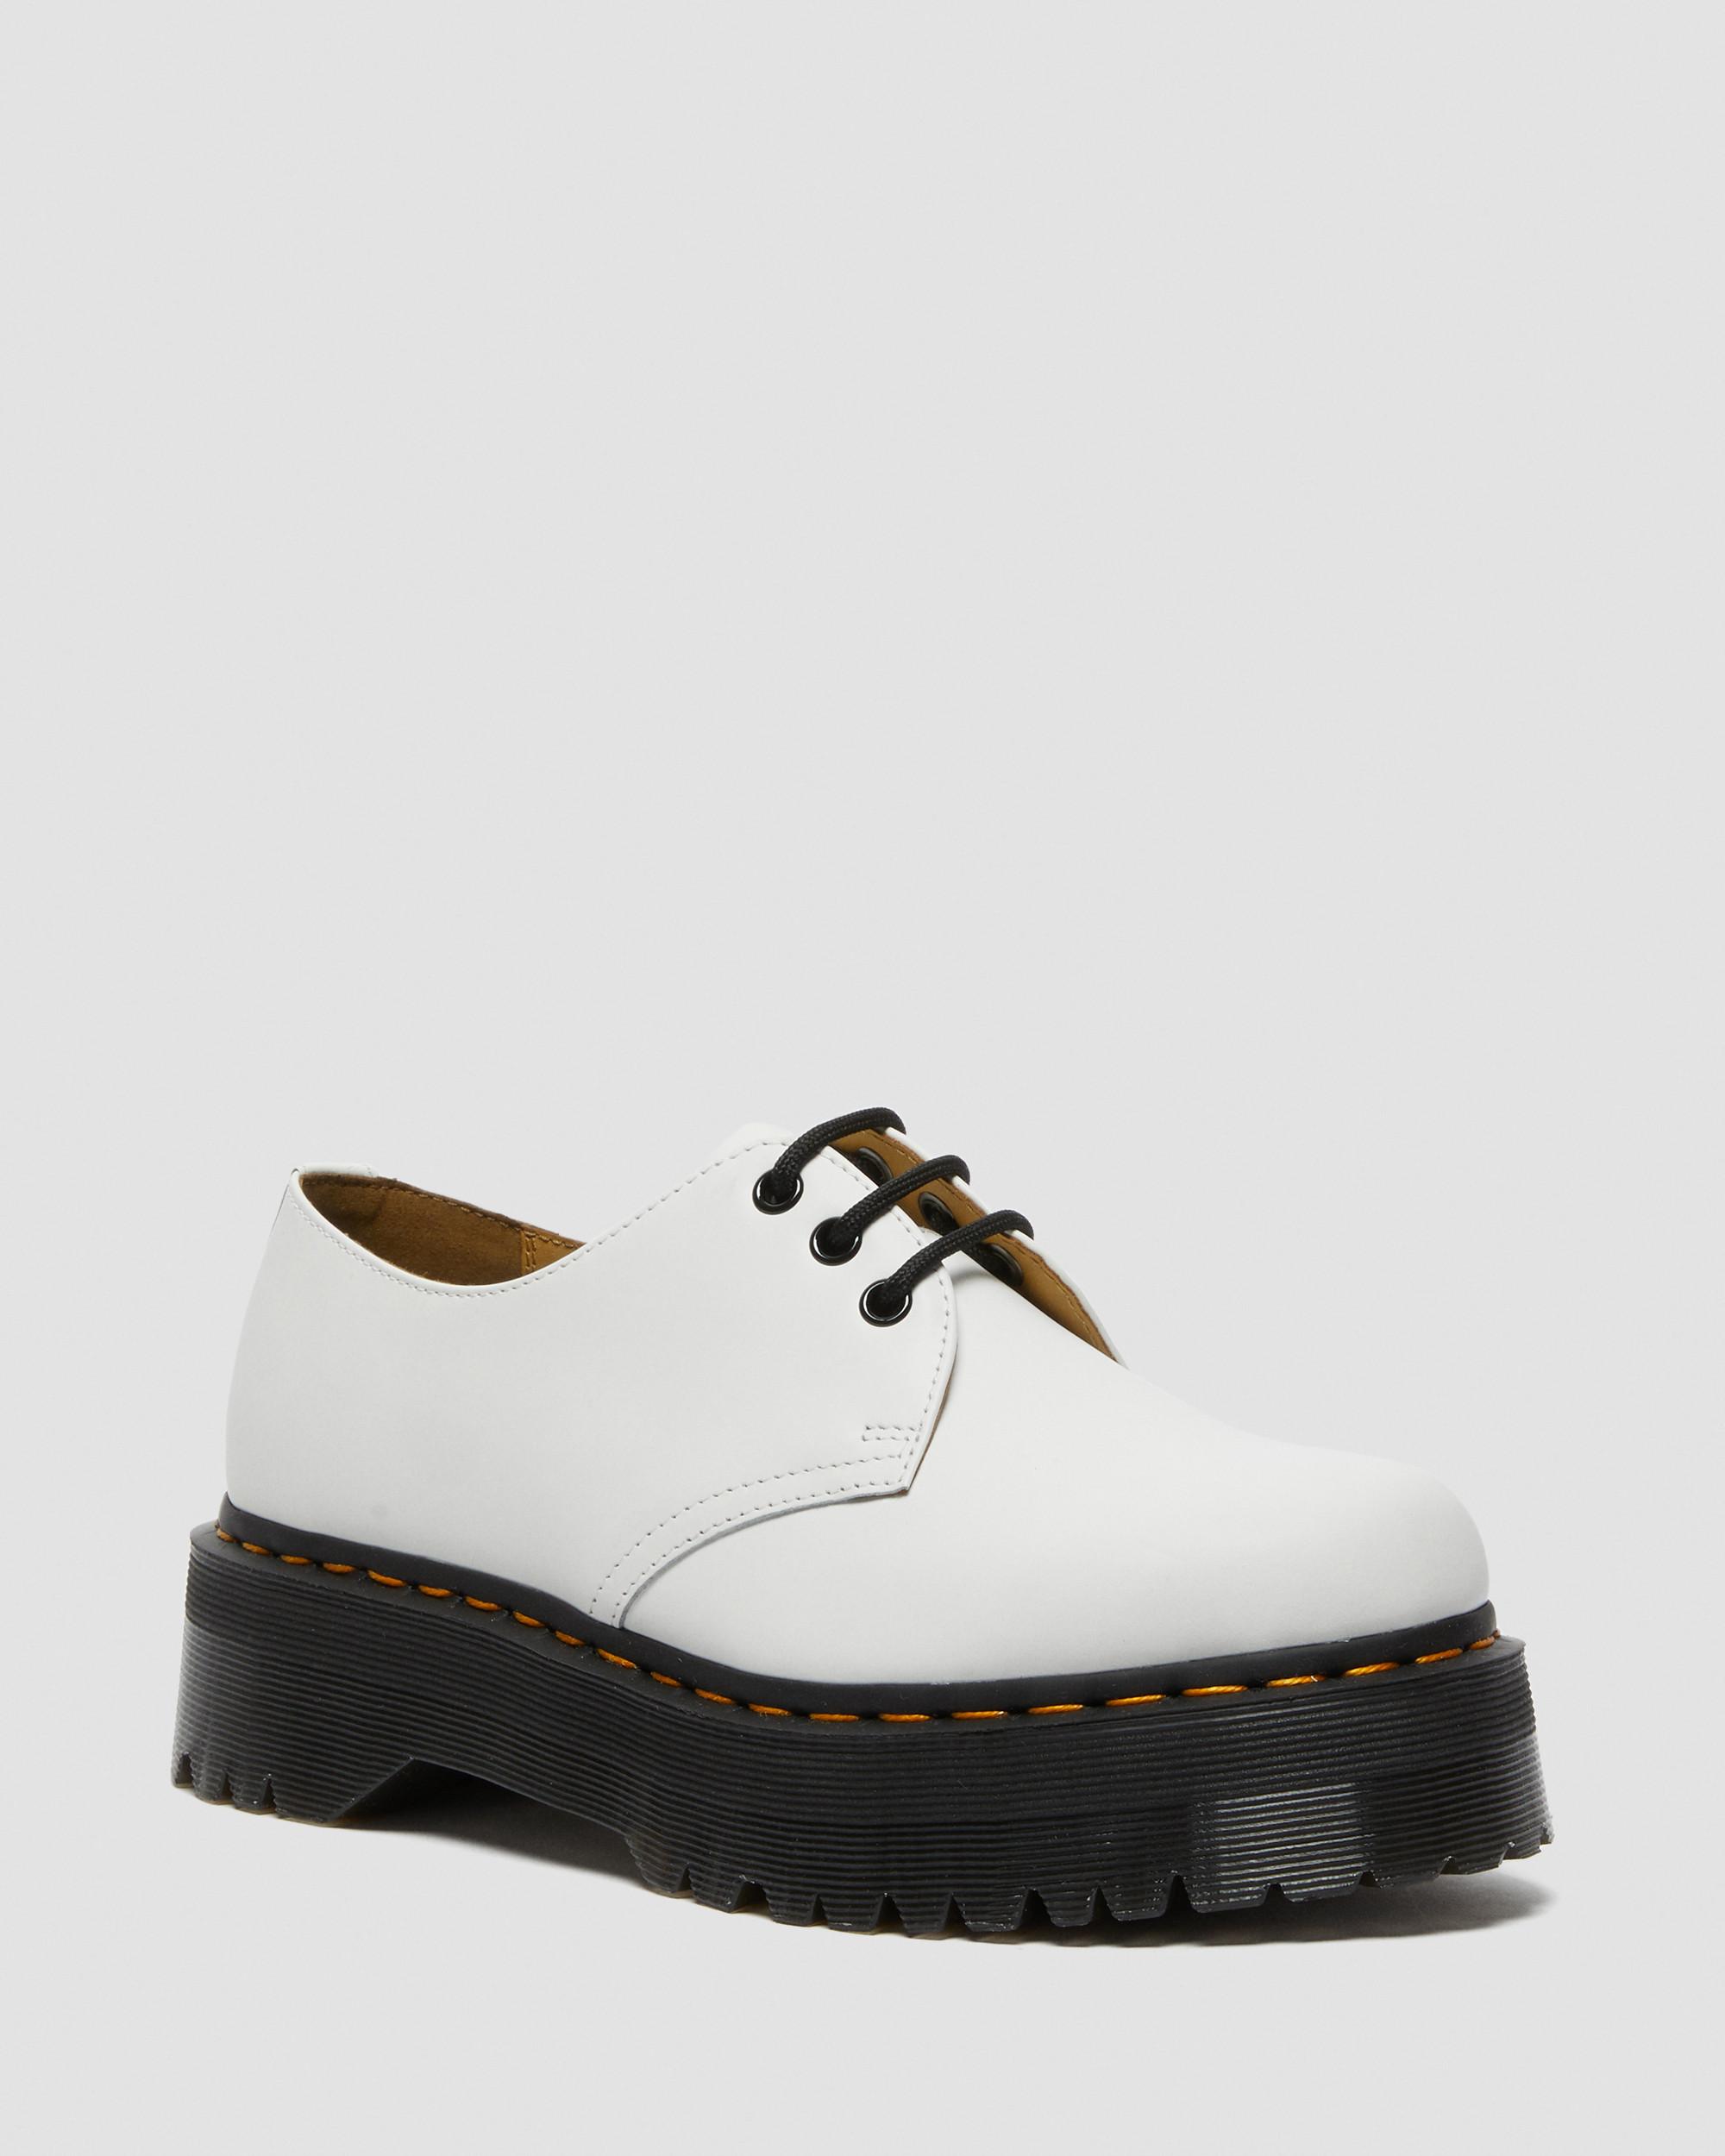 Dr Martens - 1461 White Smooth Leather Platform Shoes